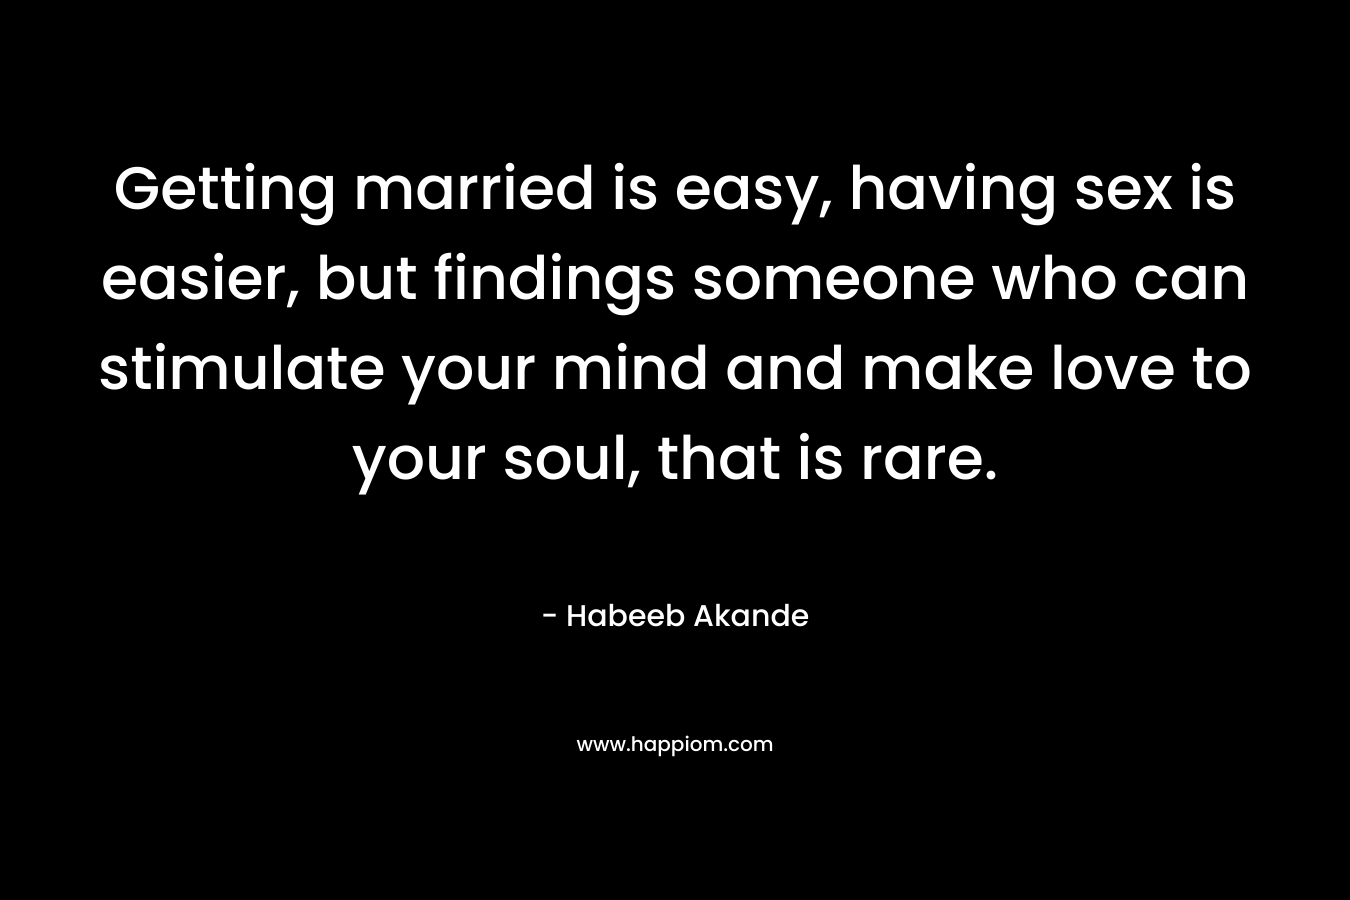 Getting married is easy, having sex is easier, but findings someone who can stimulate your mind and make love to your soul, that is rare. – Habeeb Akande